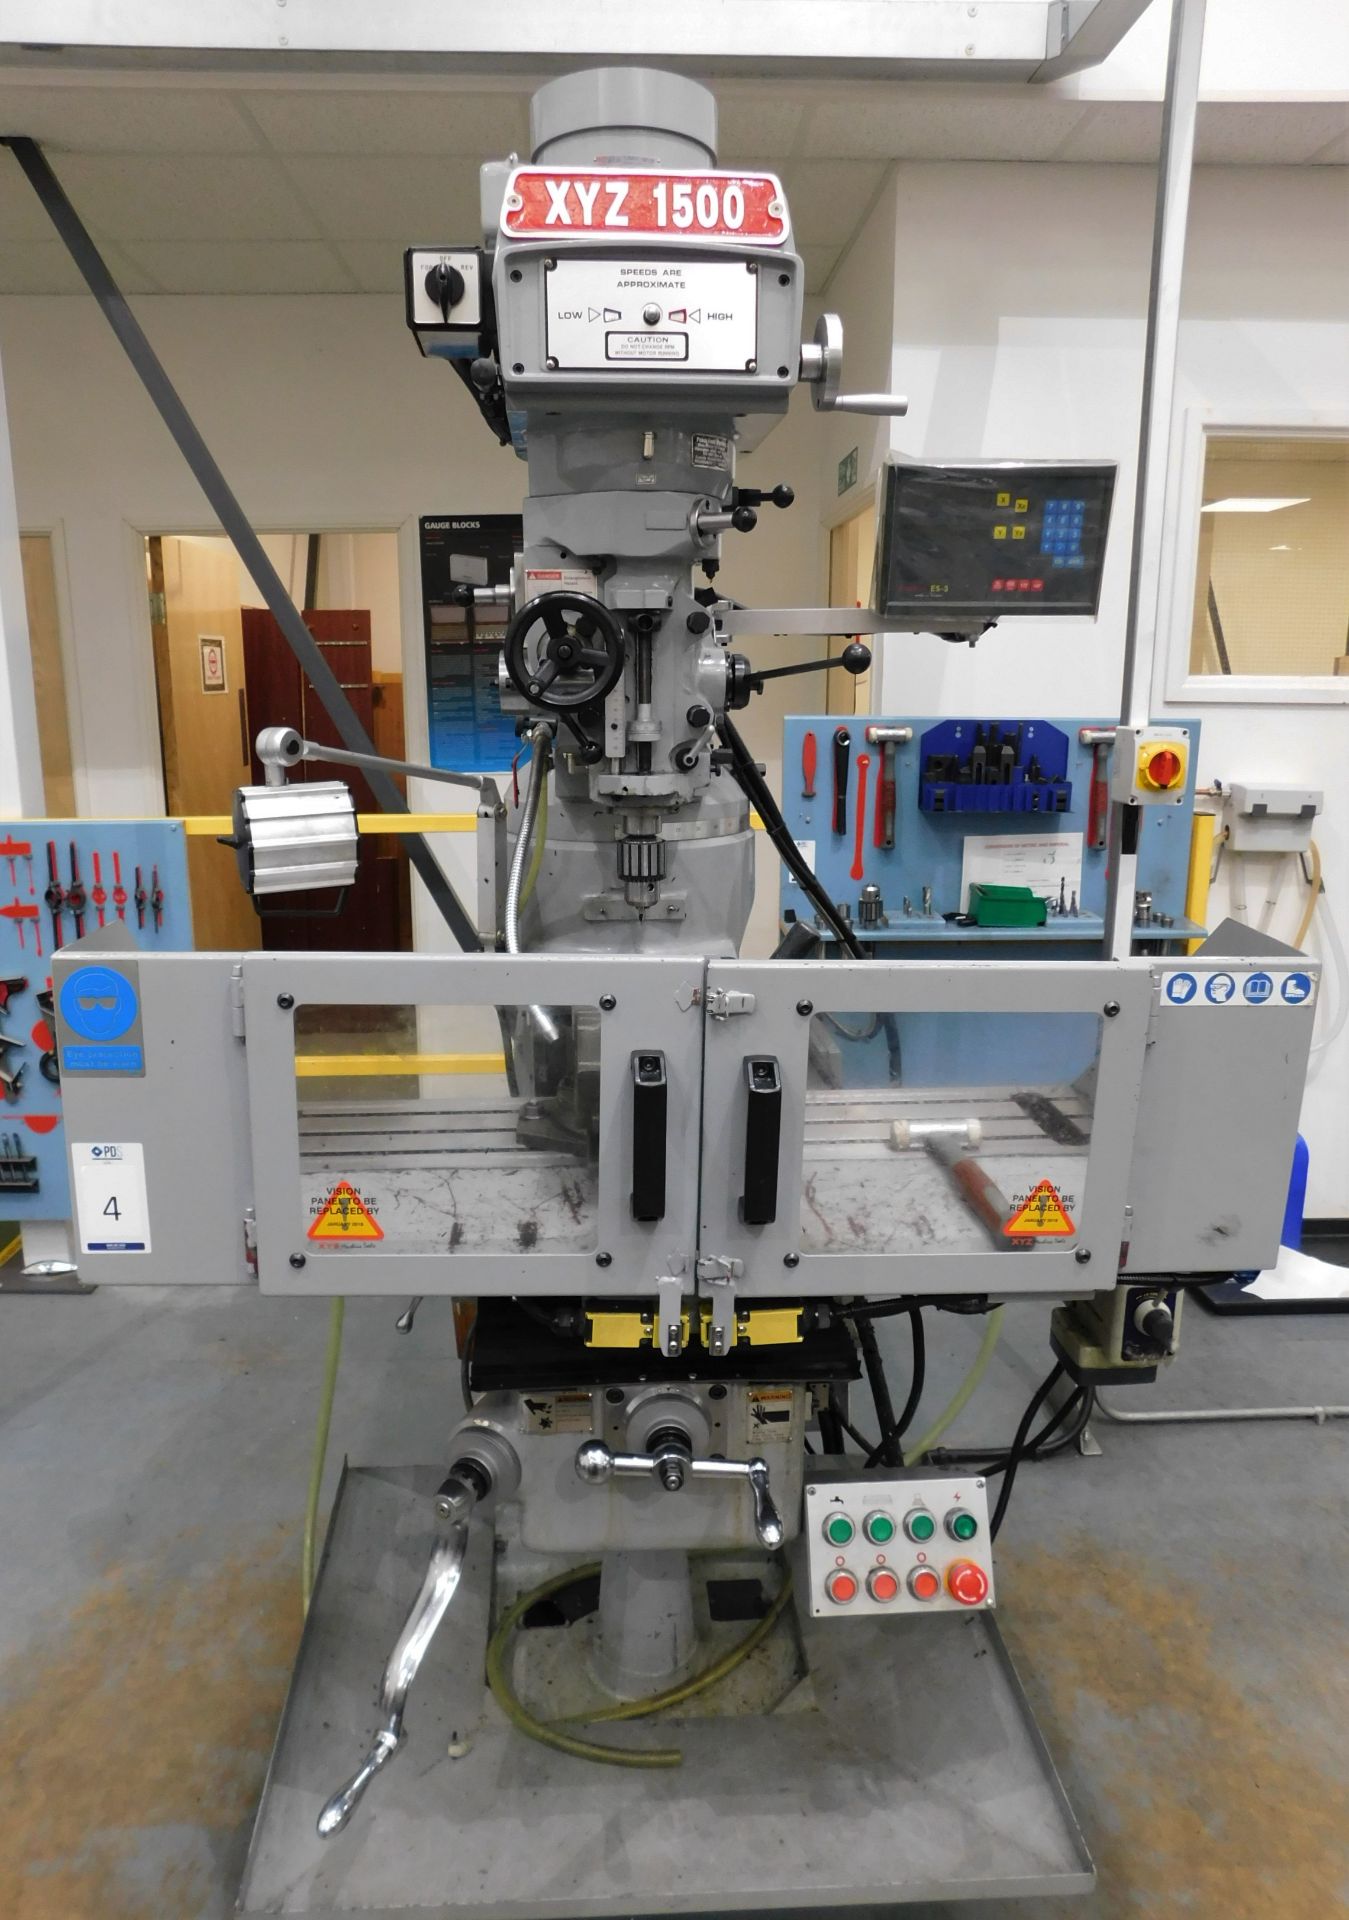 XYZ 1500 Turret Mill (2015), serial number 104012, 3 HP Variable Speed Head, 1069 x 228mm Table &